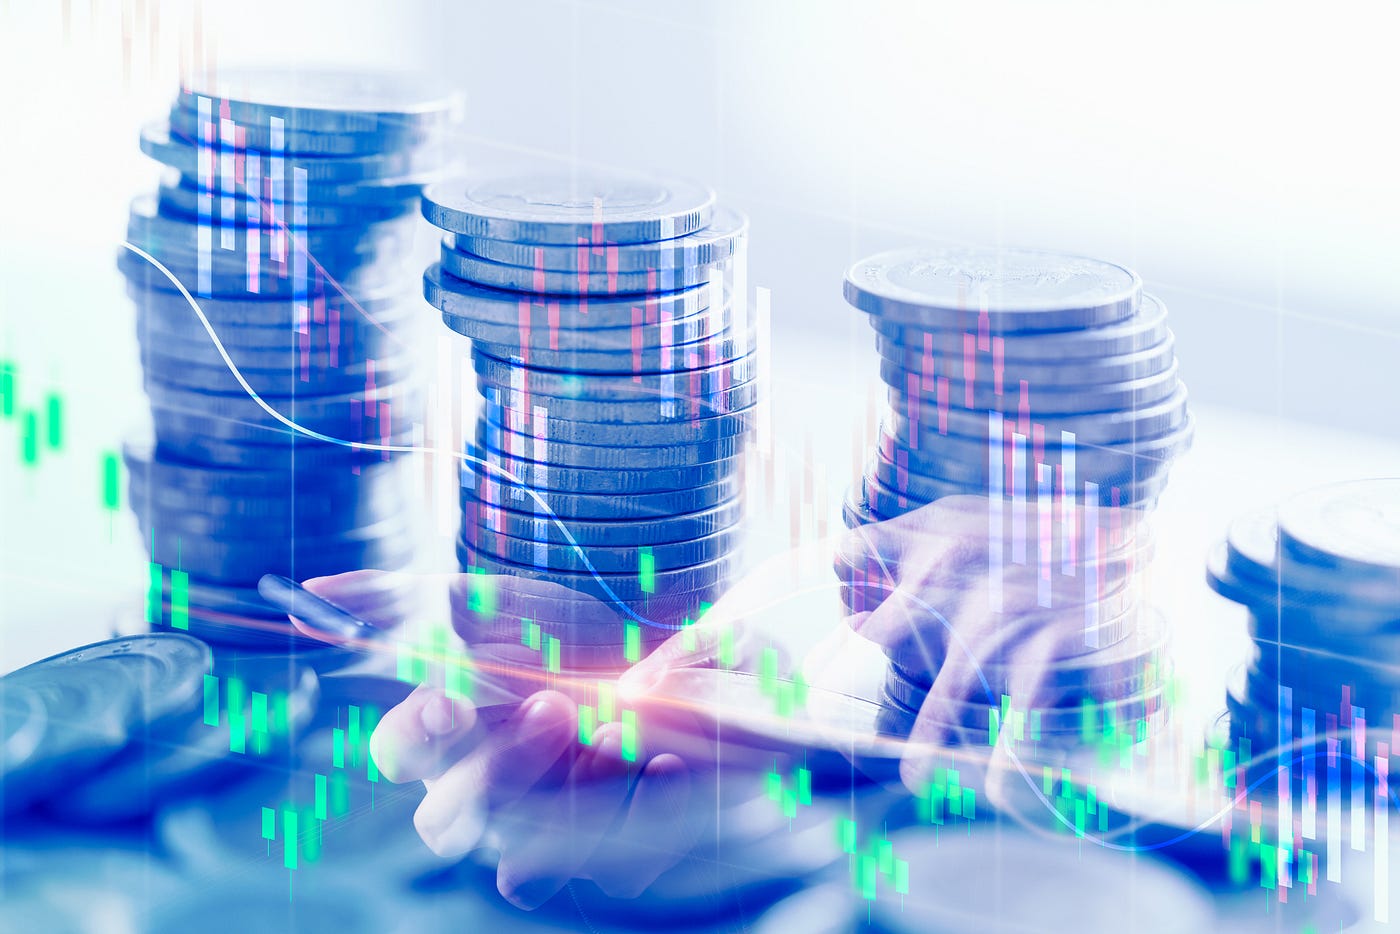 A double exposed image with a stock market concept, showing stacks of coins, hands tapping a smartphone, and a trading graph.